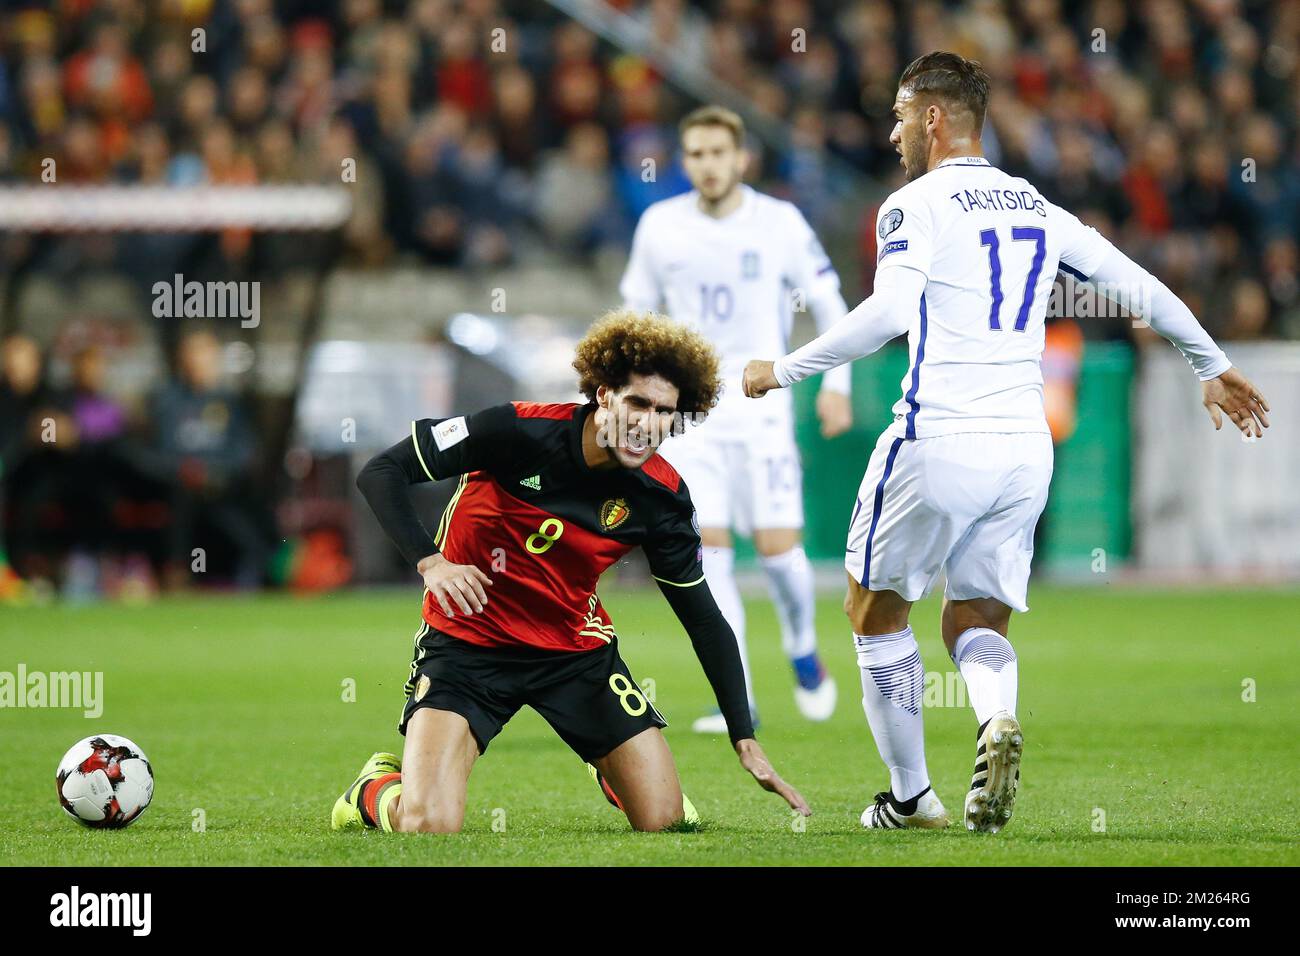 Belgium's Marouane Fellaini and Greece's Panagiotis Tachtsidis fight for the ball during a World Cup 2018 qualification game between Belgium's Red Devils and Greece, Saturday 25 March 2017, at the King Baudouin stadium in Brussels. BELGA PHOTO BRUNO FAHY Stock Photo